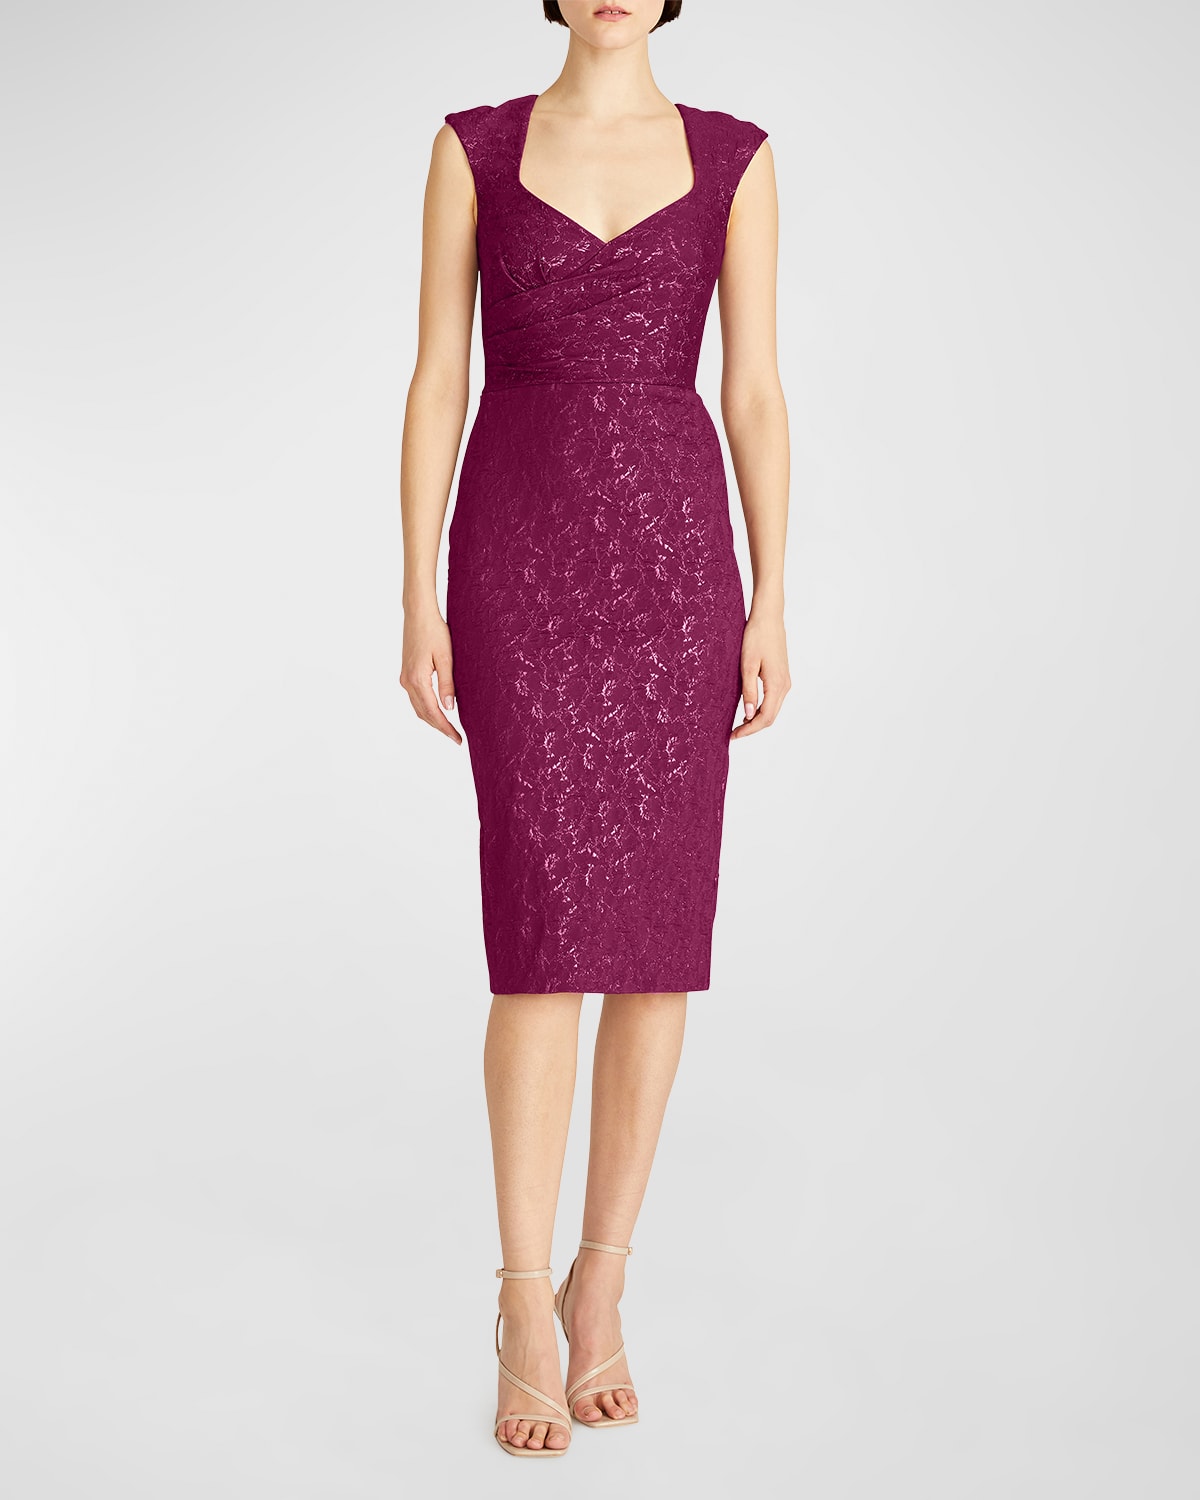 THEIA OMNIA FITTED COCKTAIL DRESS